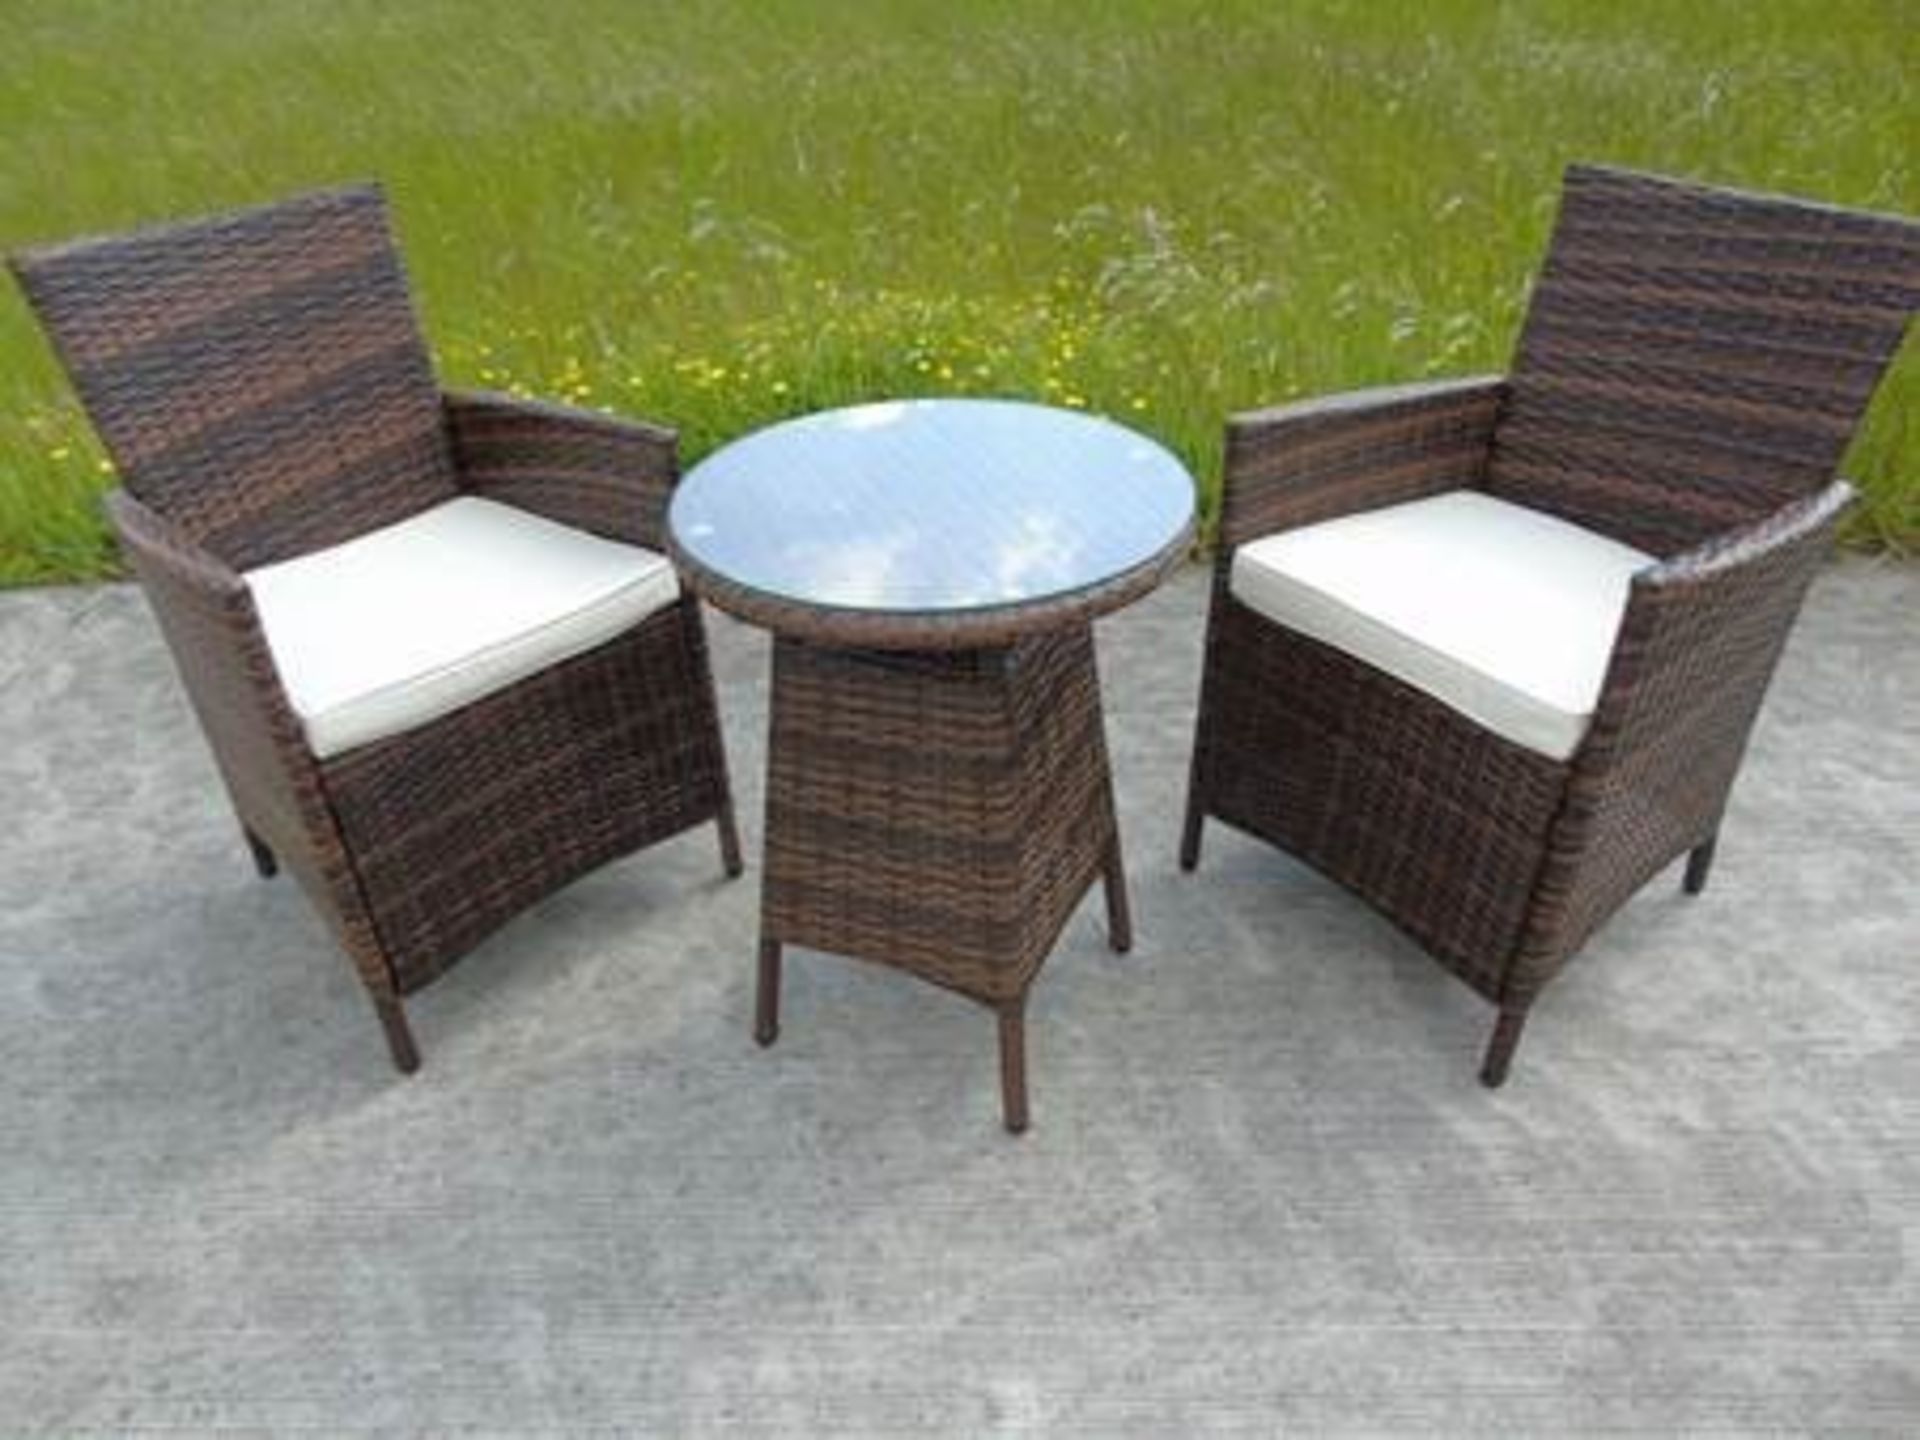 + VAT Brand New Chelsea Garden Company Two Person Table & Chair Set - Item Is Available From Approx